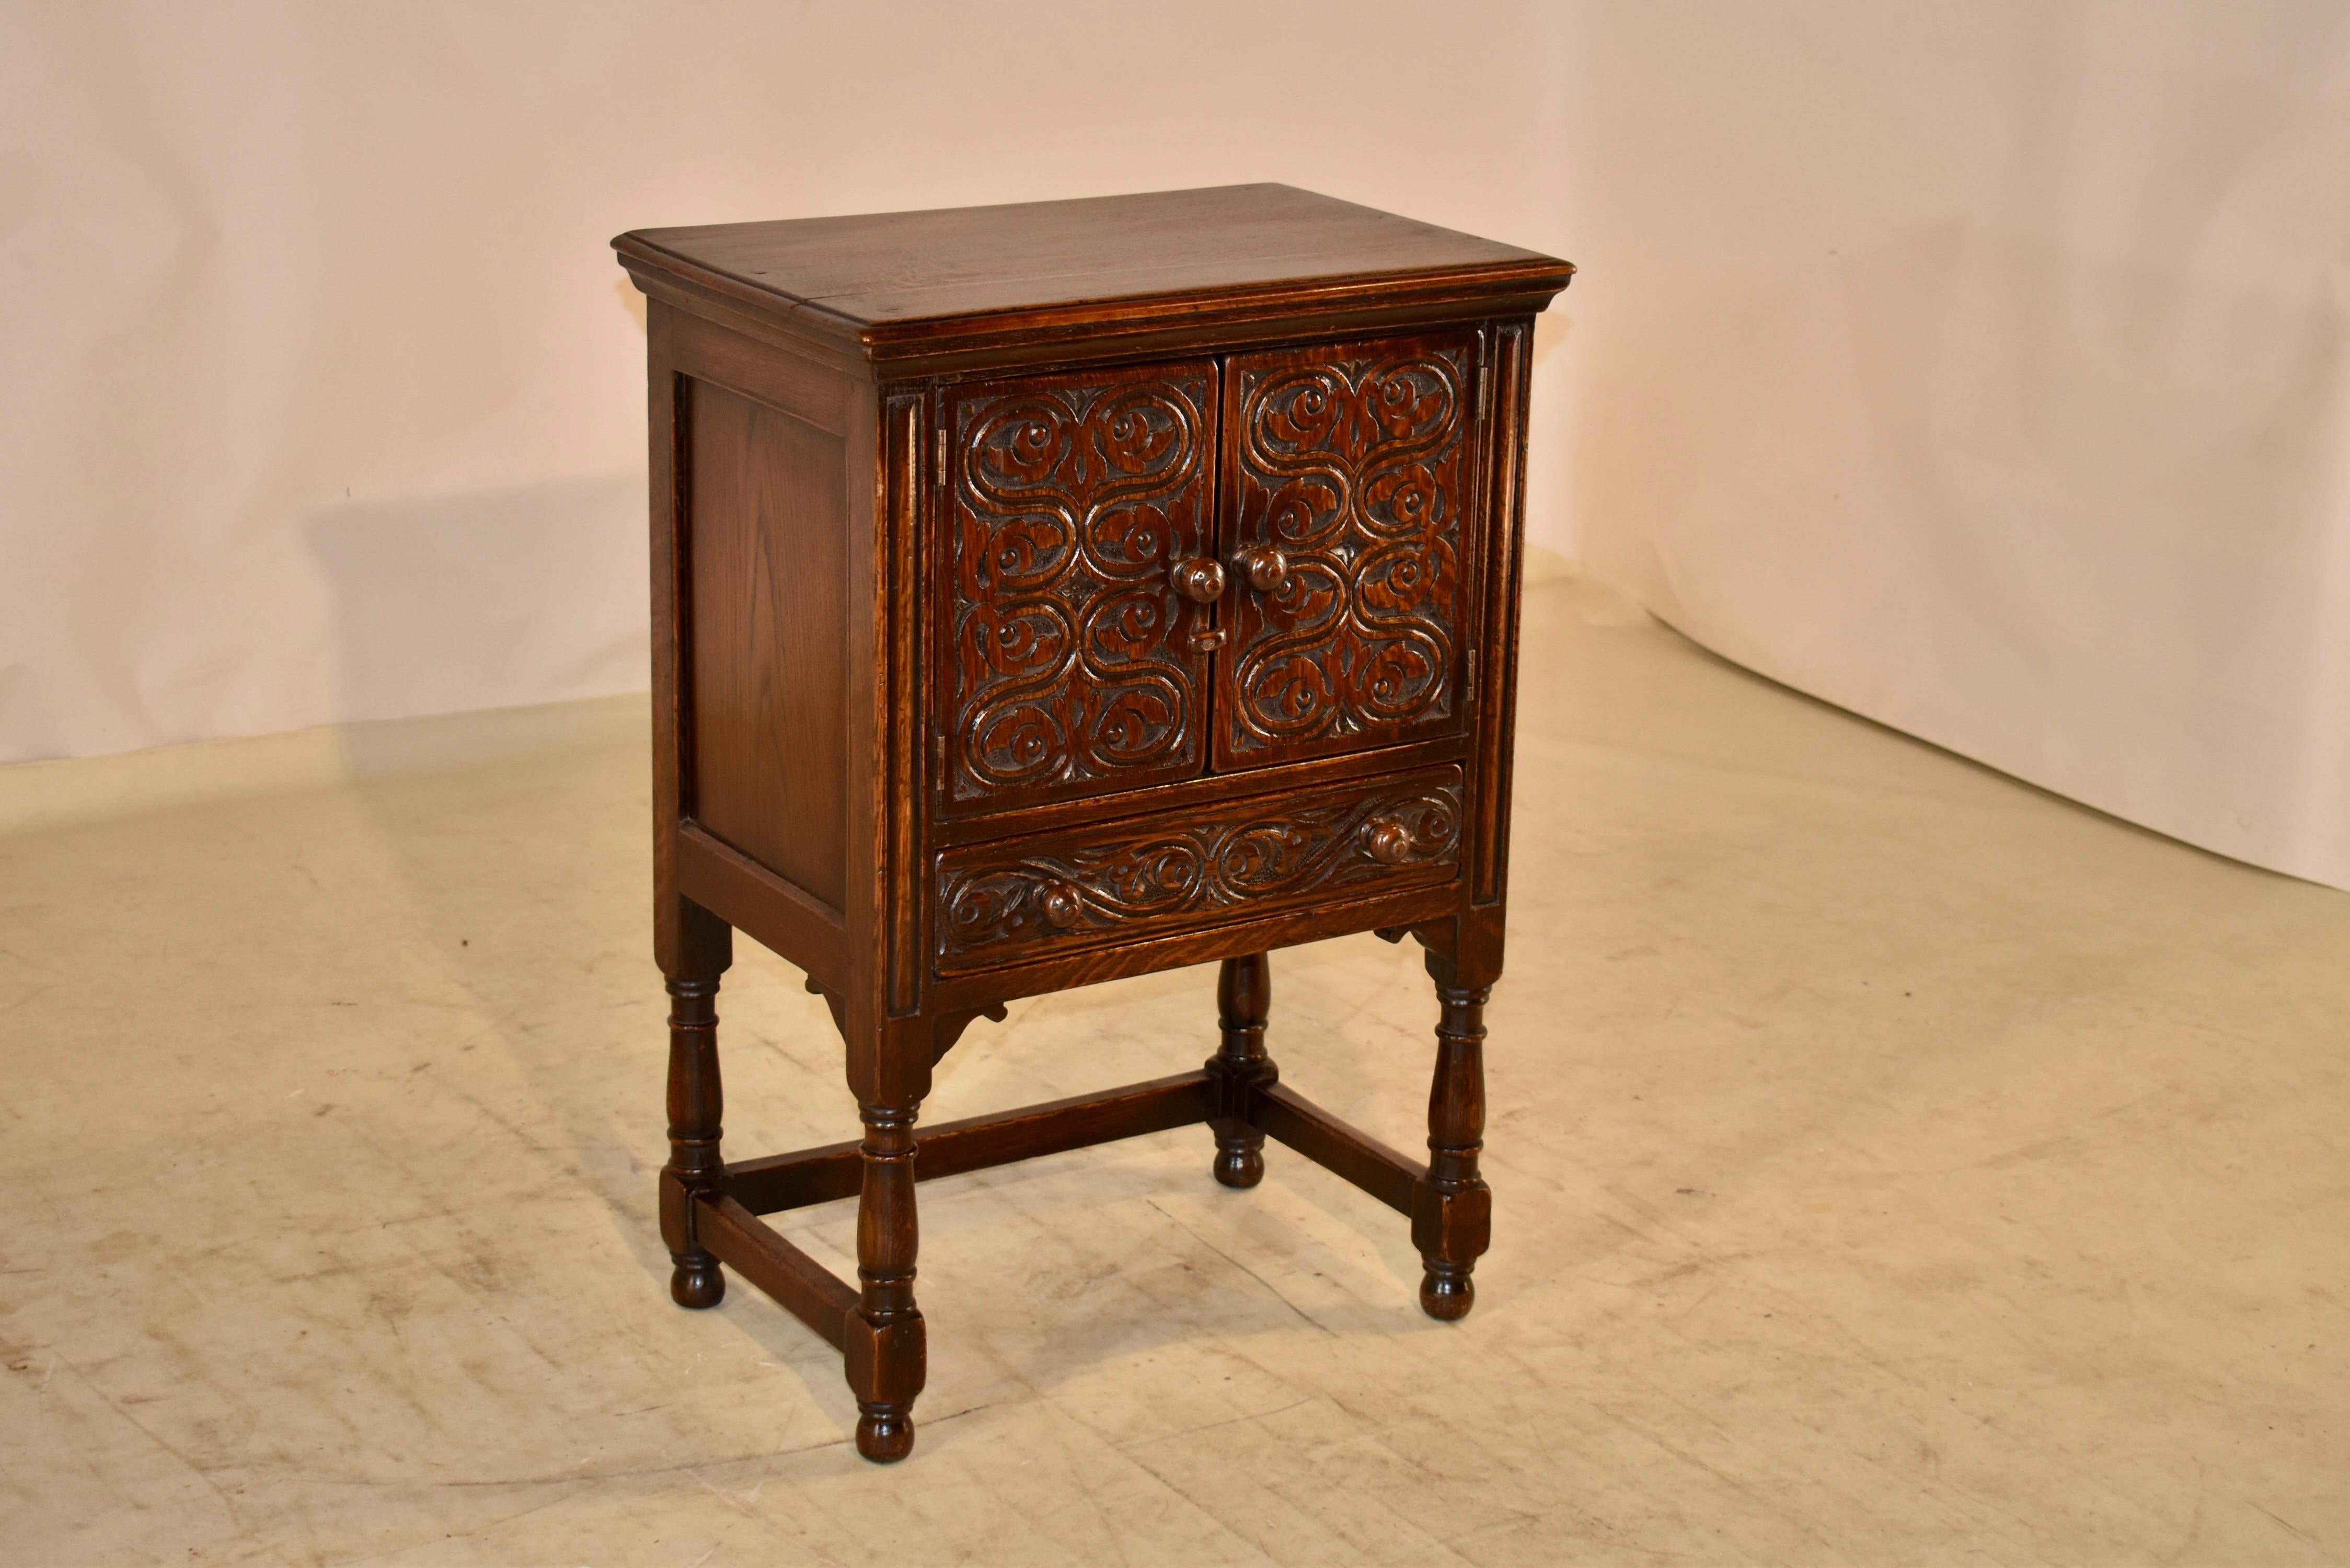 Late Victorian Late 19th Century, Oak Side Table